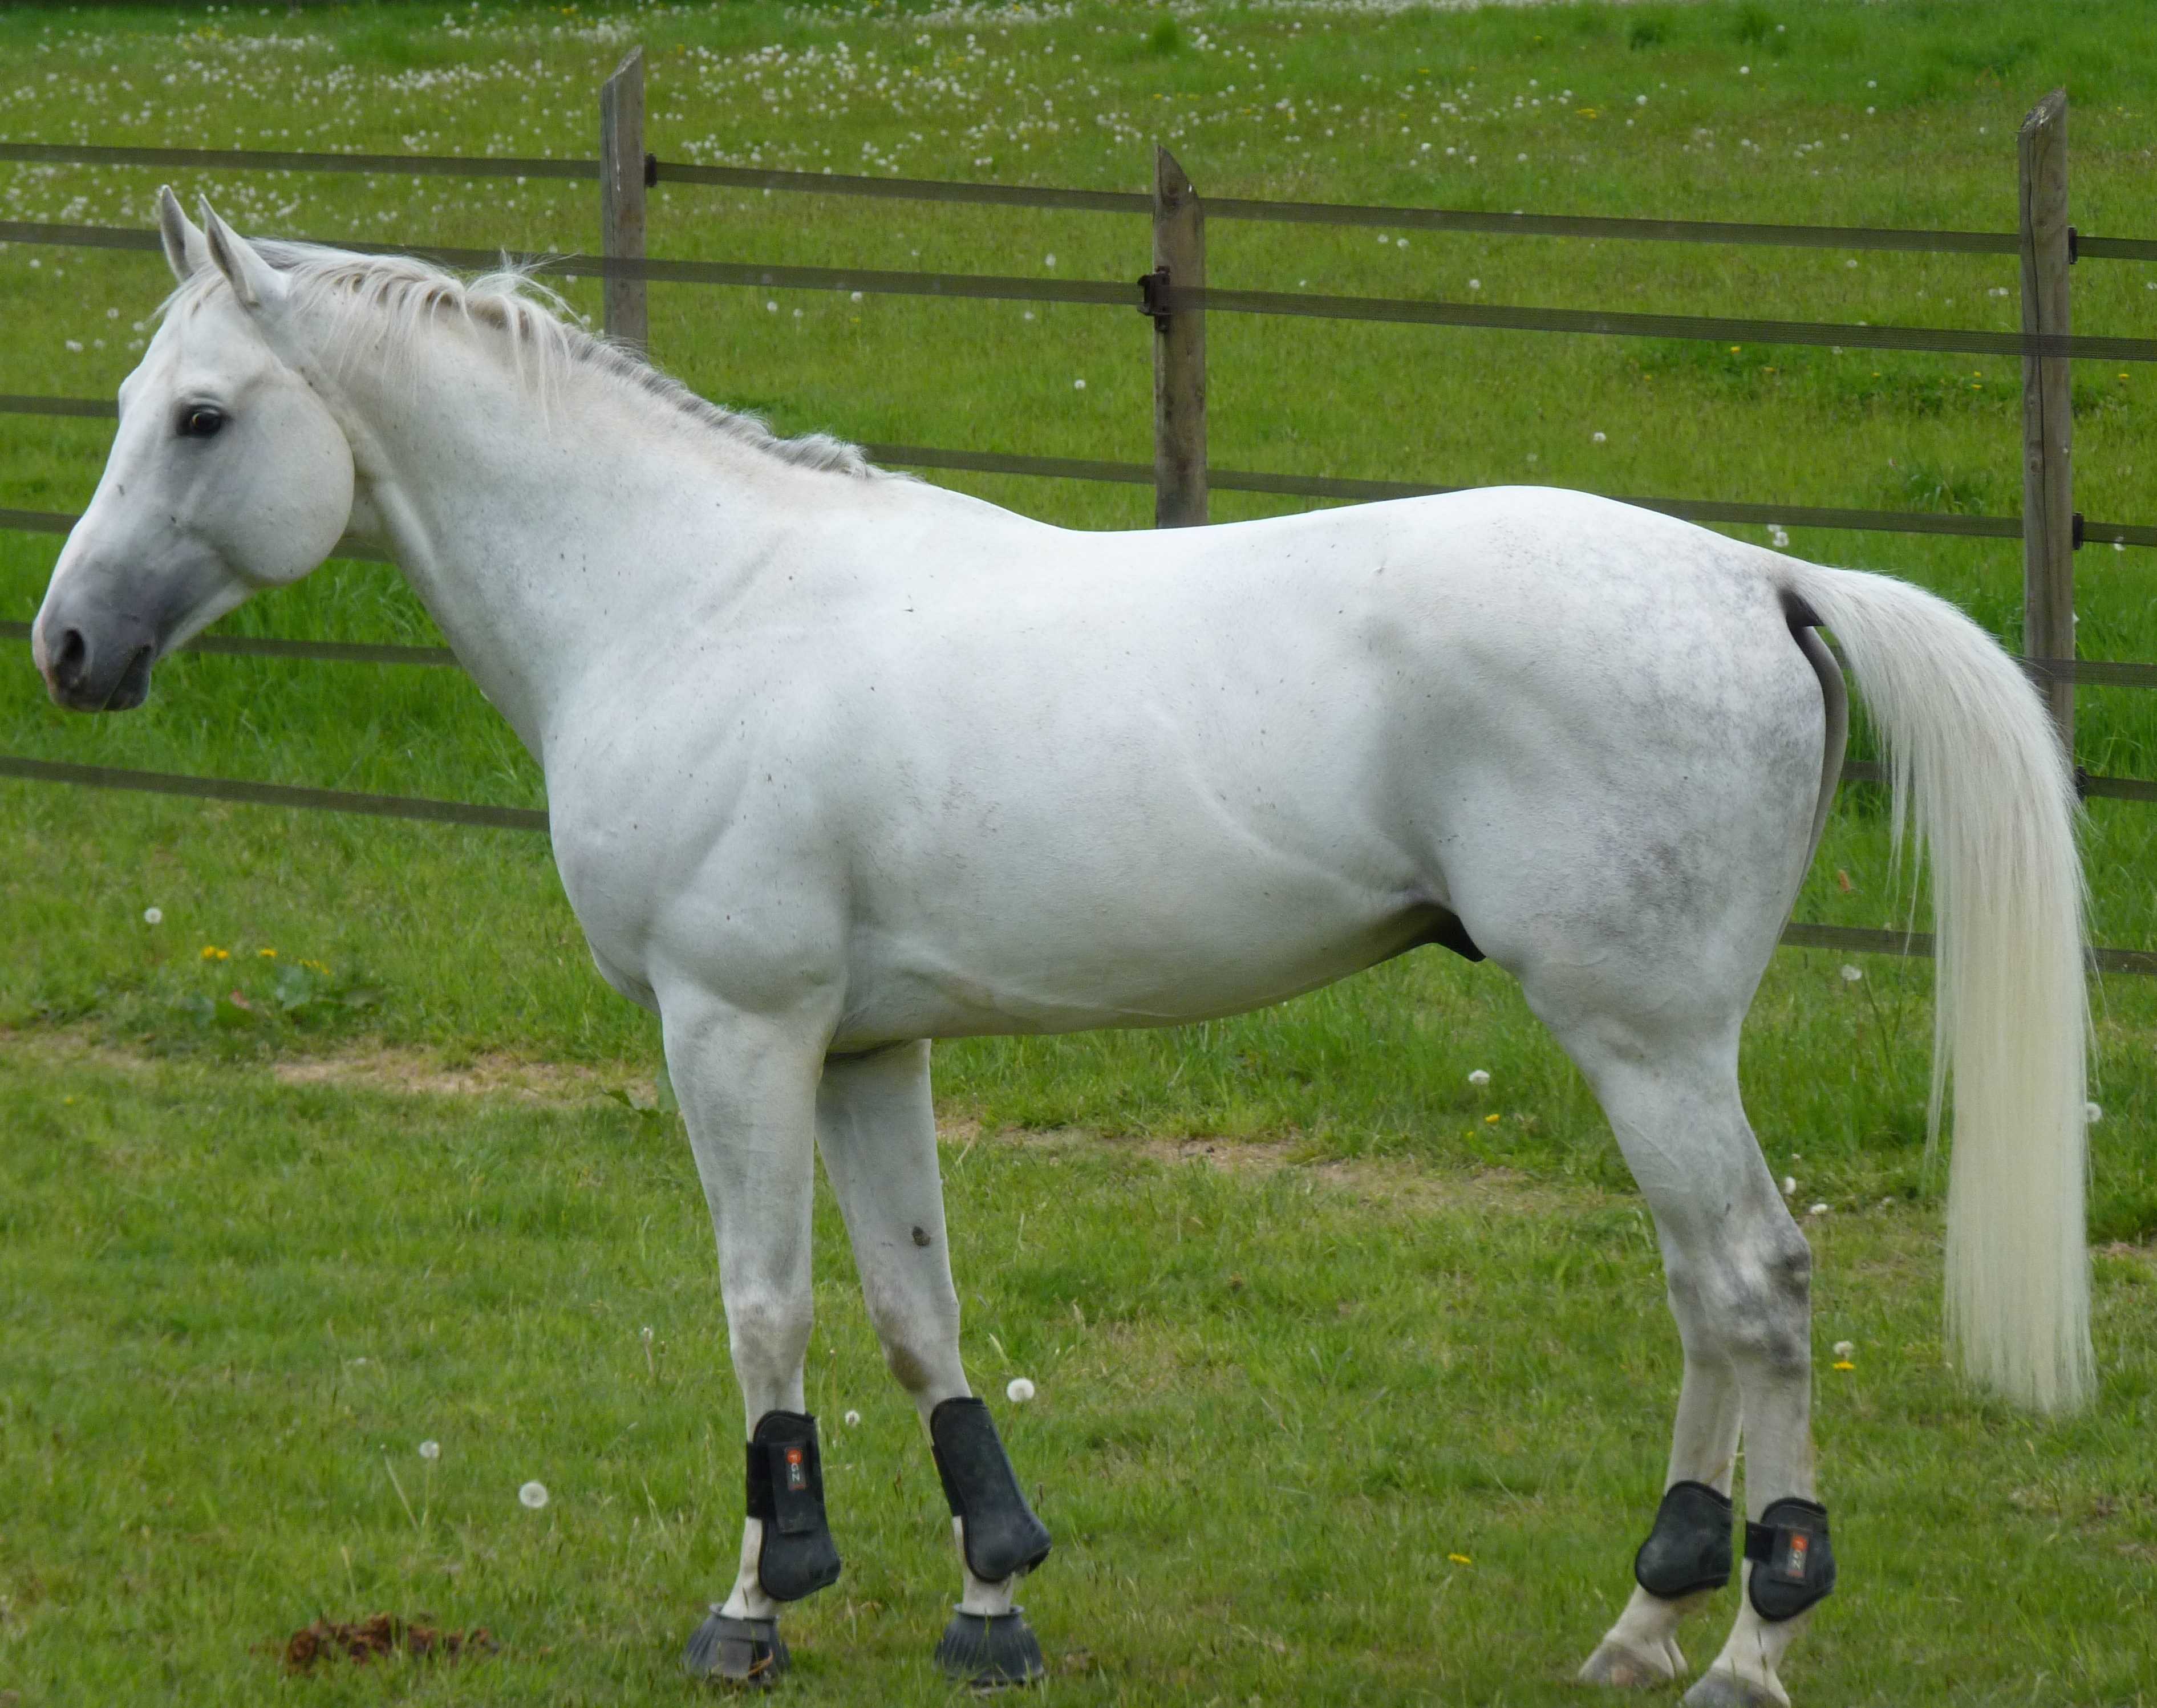 interesting profile facts about the Anglo-Arabian horse breed, history, size & weight, lifespan, traits, temperament, coat, training, breed standard, speed, diet, grooming, care, health, pedigree, uses, cost